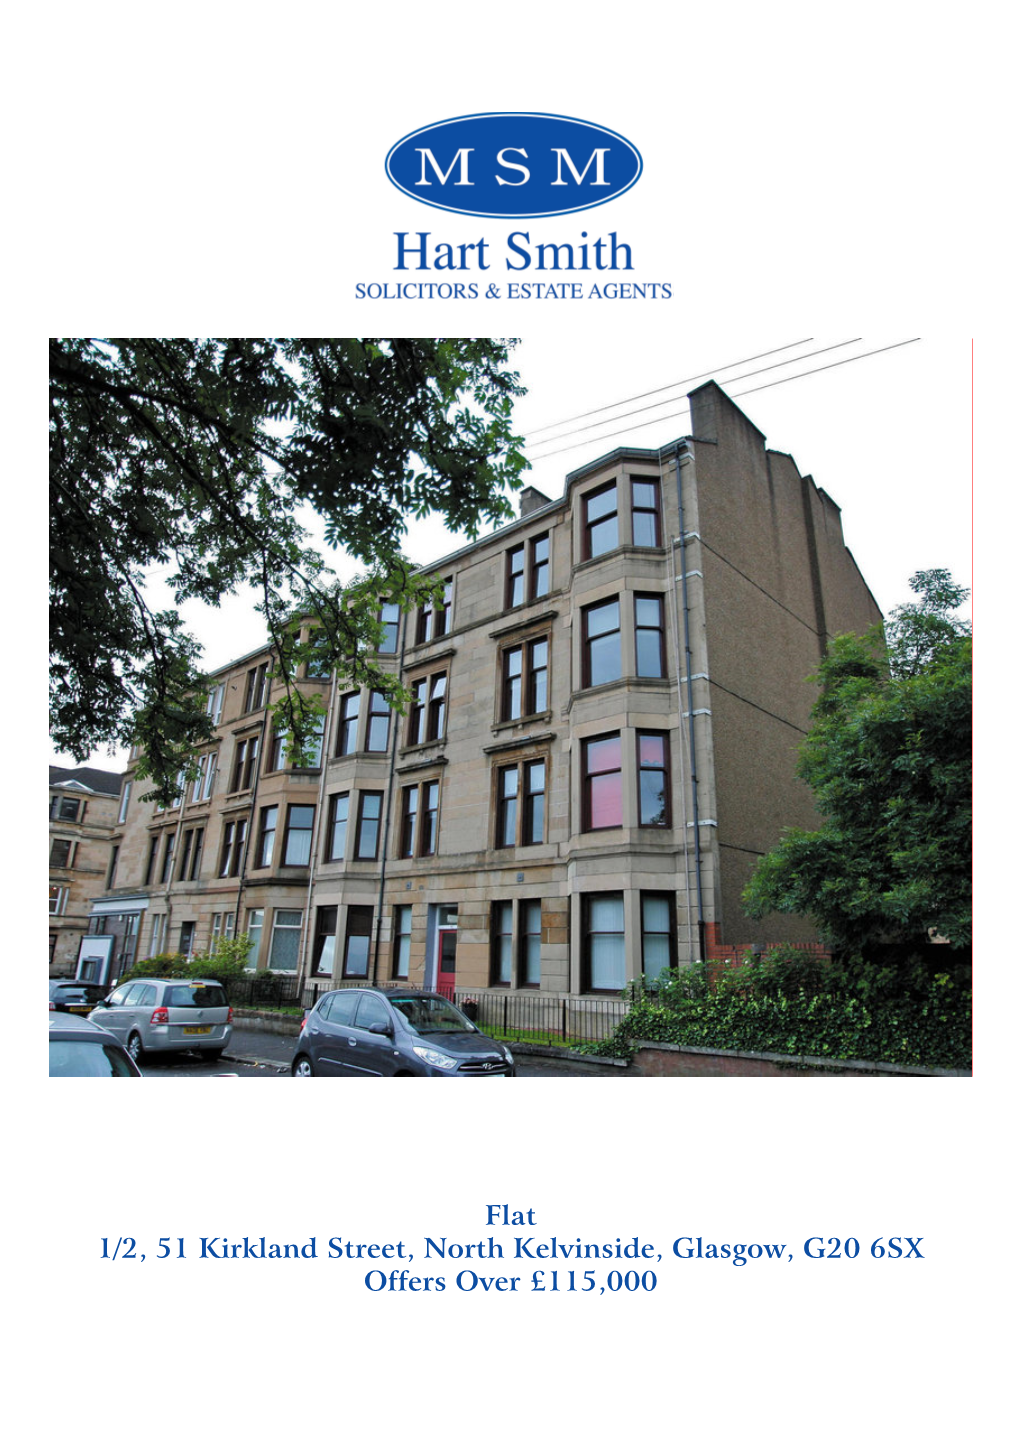 Flat 1/2, 51 Kirkland Street, North Kelvinside, Glasgow, G20 6SX Offers Over £115,000 VIEWING by Appointment with MSM Hart Smith Solicitors, Tel: 0141 339 5252